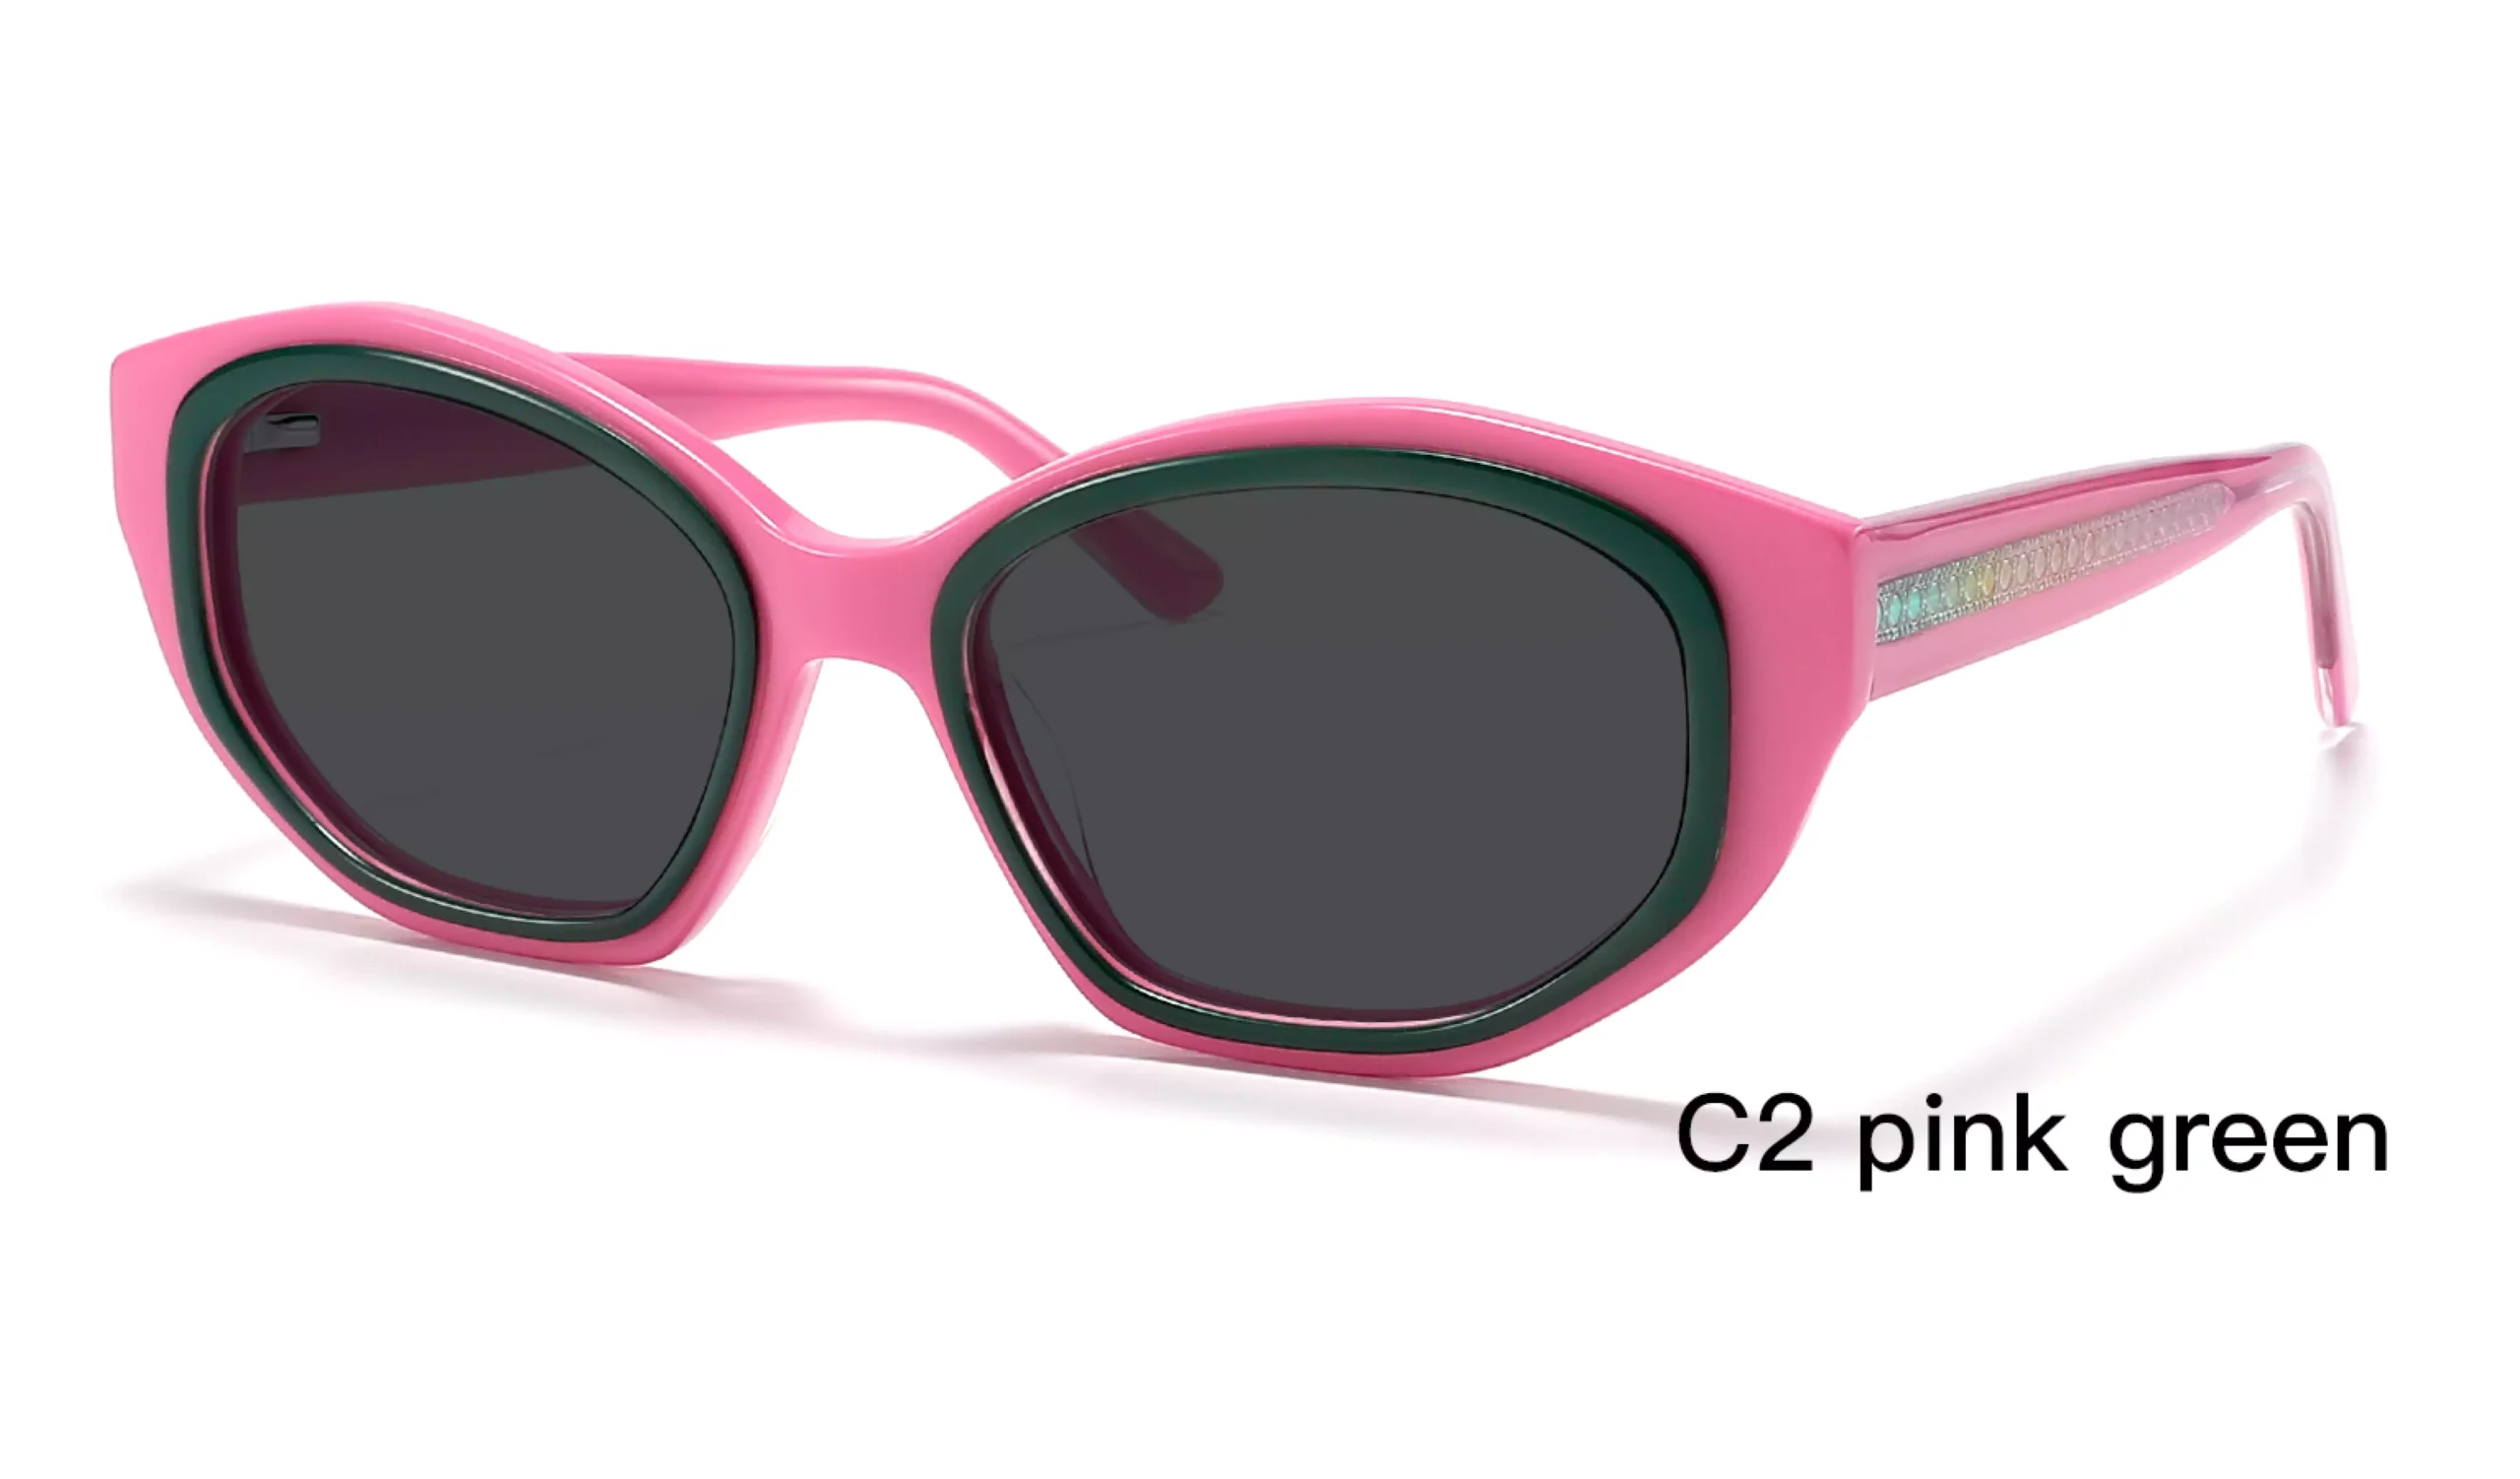 geometric, gradient temple, sunglasses, acetate, pink green, 45 degree display, wholesale from China